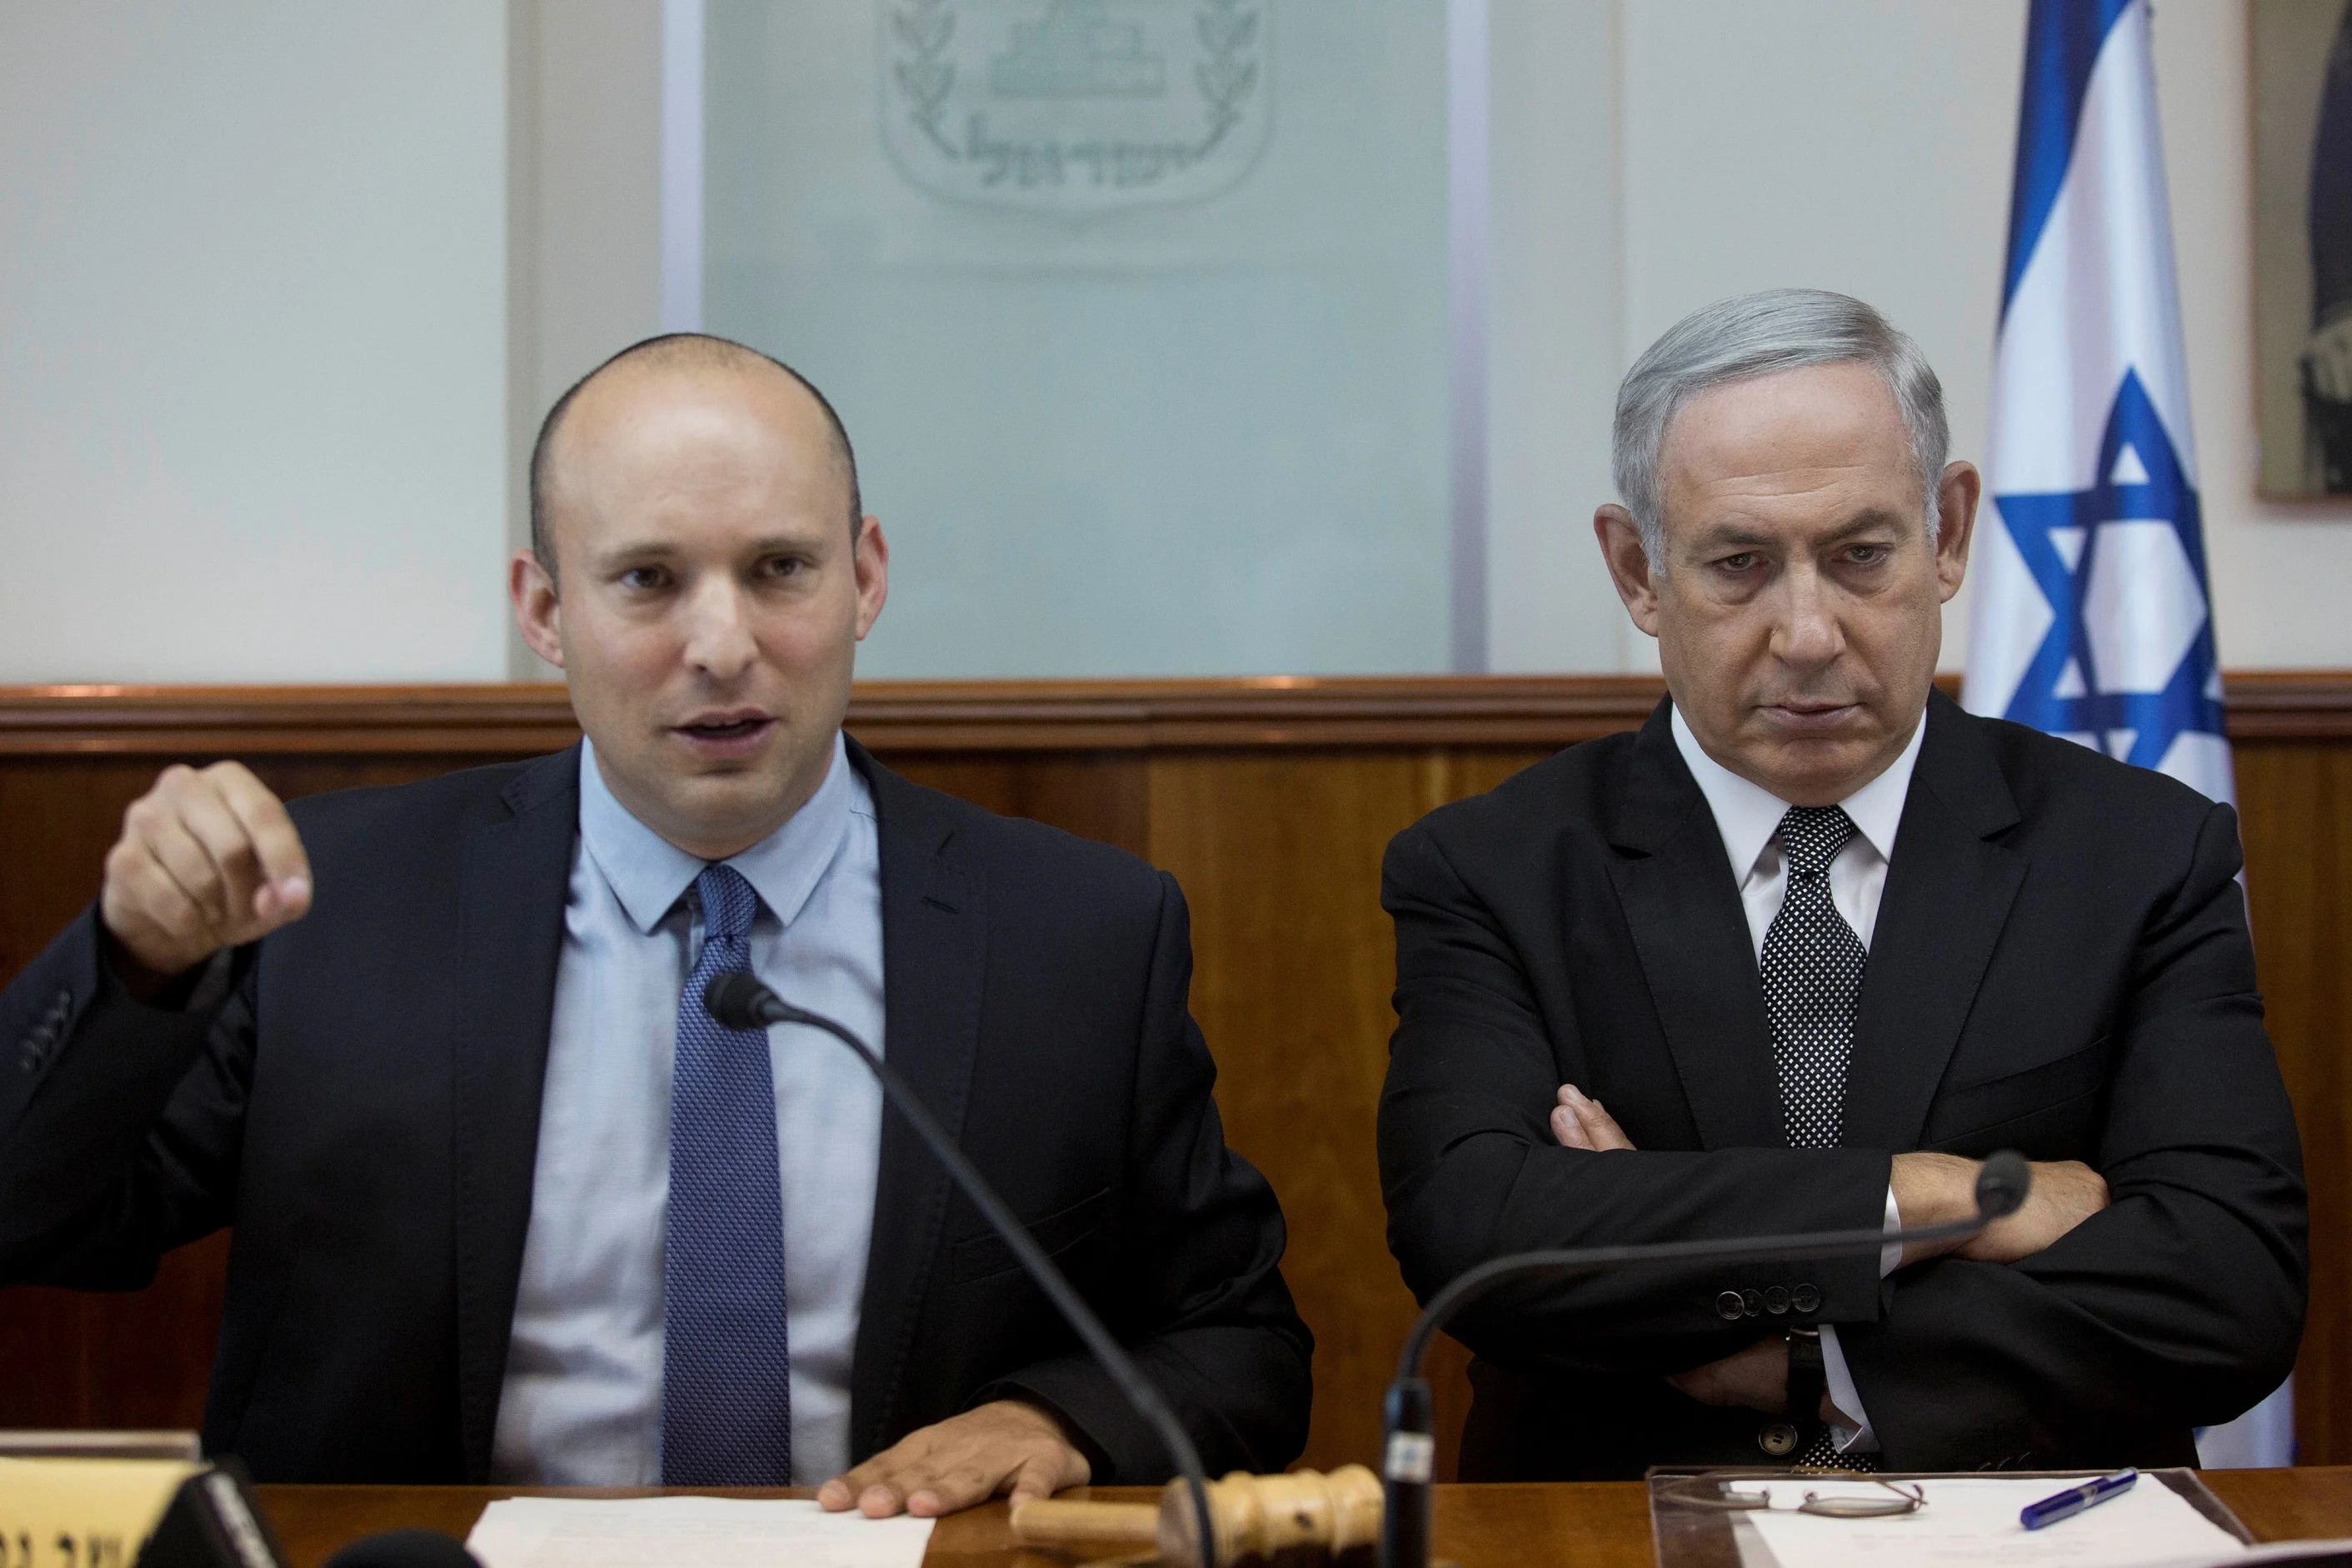 Israeli Pm Netanyahu Sits Next To Education Minister Naftali Bennett During The Weekly Cabinet Meeting At His Office In Jerusalem